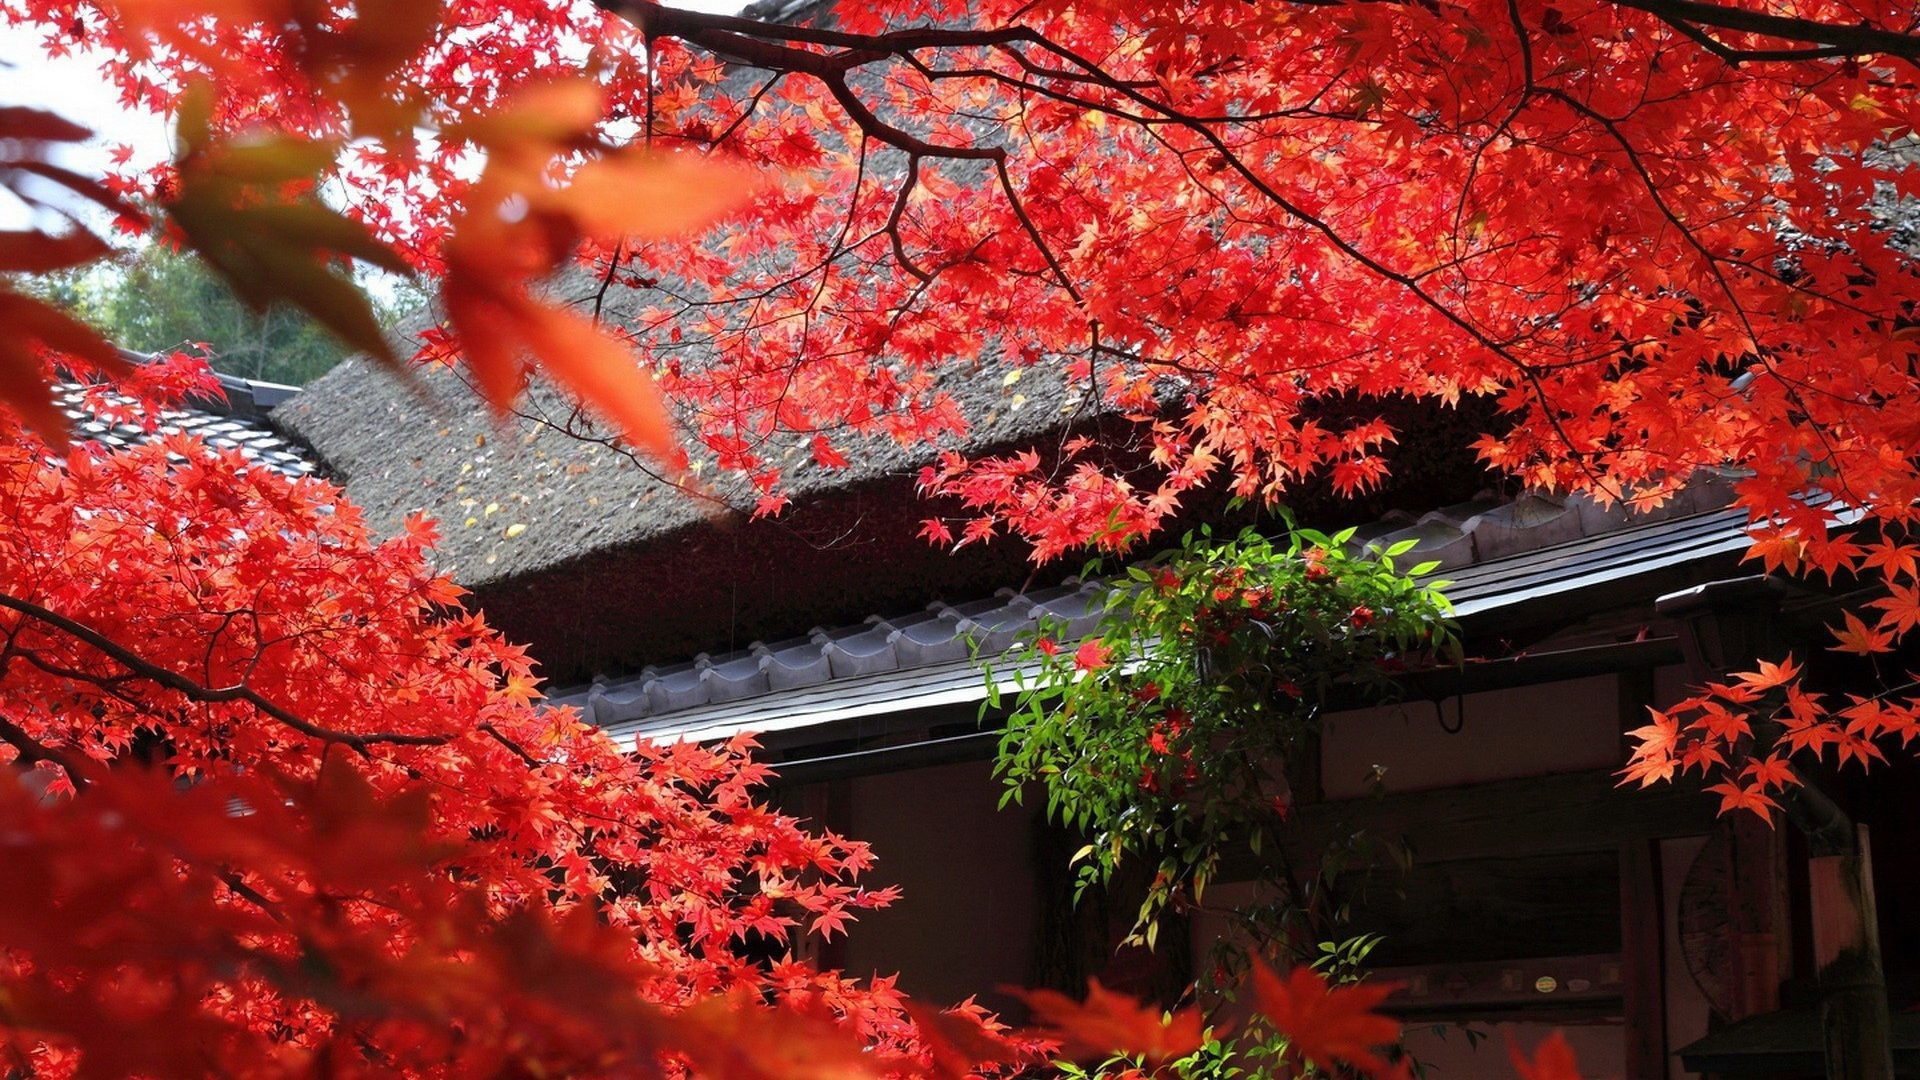 1920x1080 Autumn Japan Tree Red Leaves Super Nature Wallpapers Desktop - 1920x1200